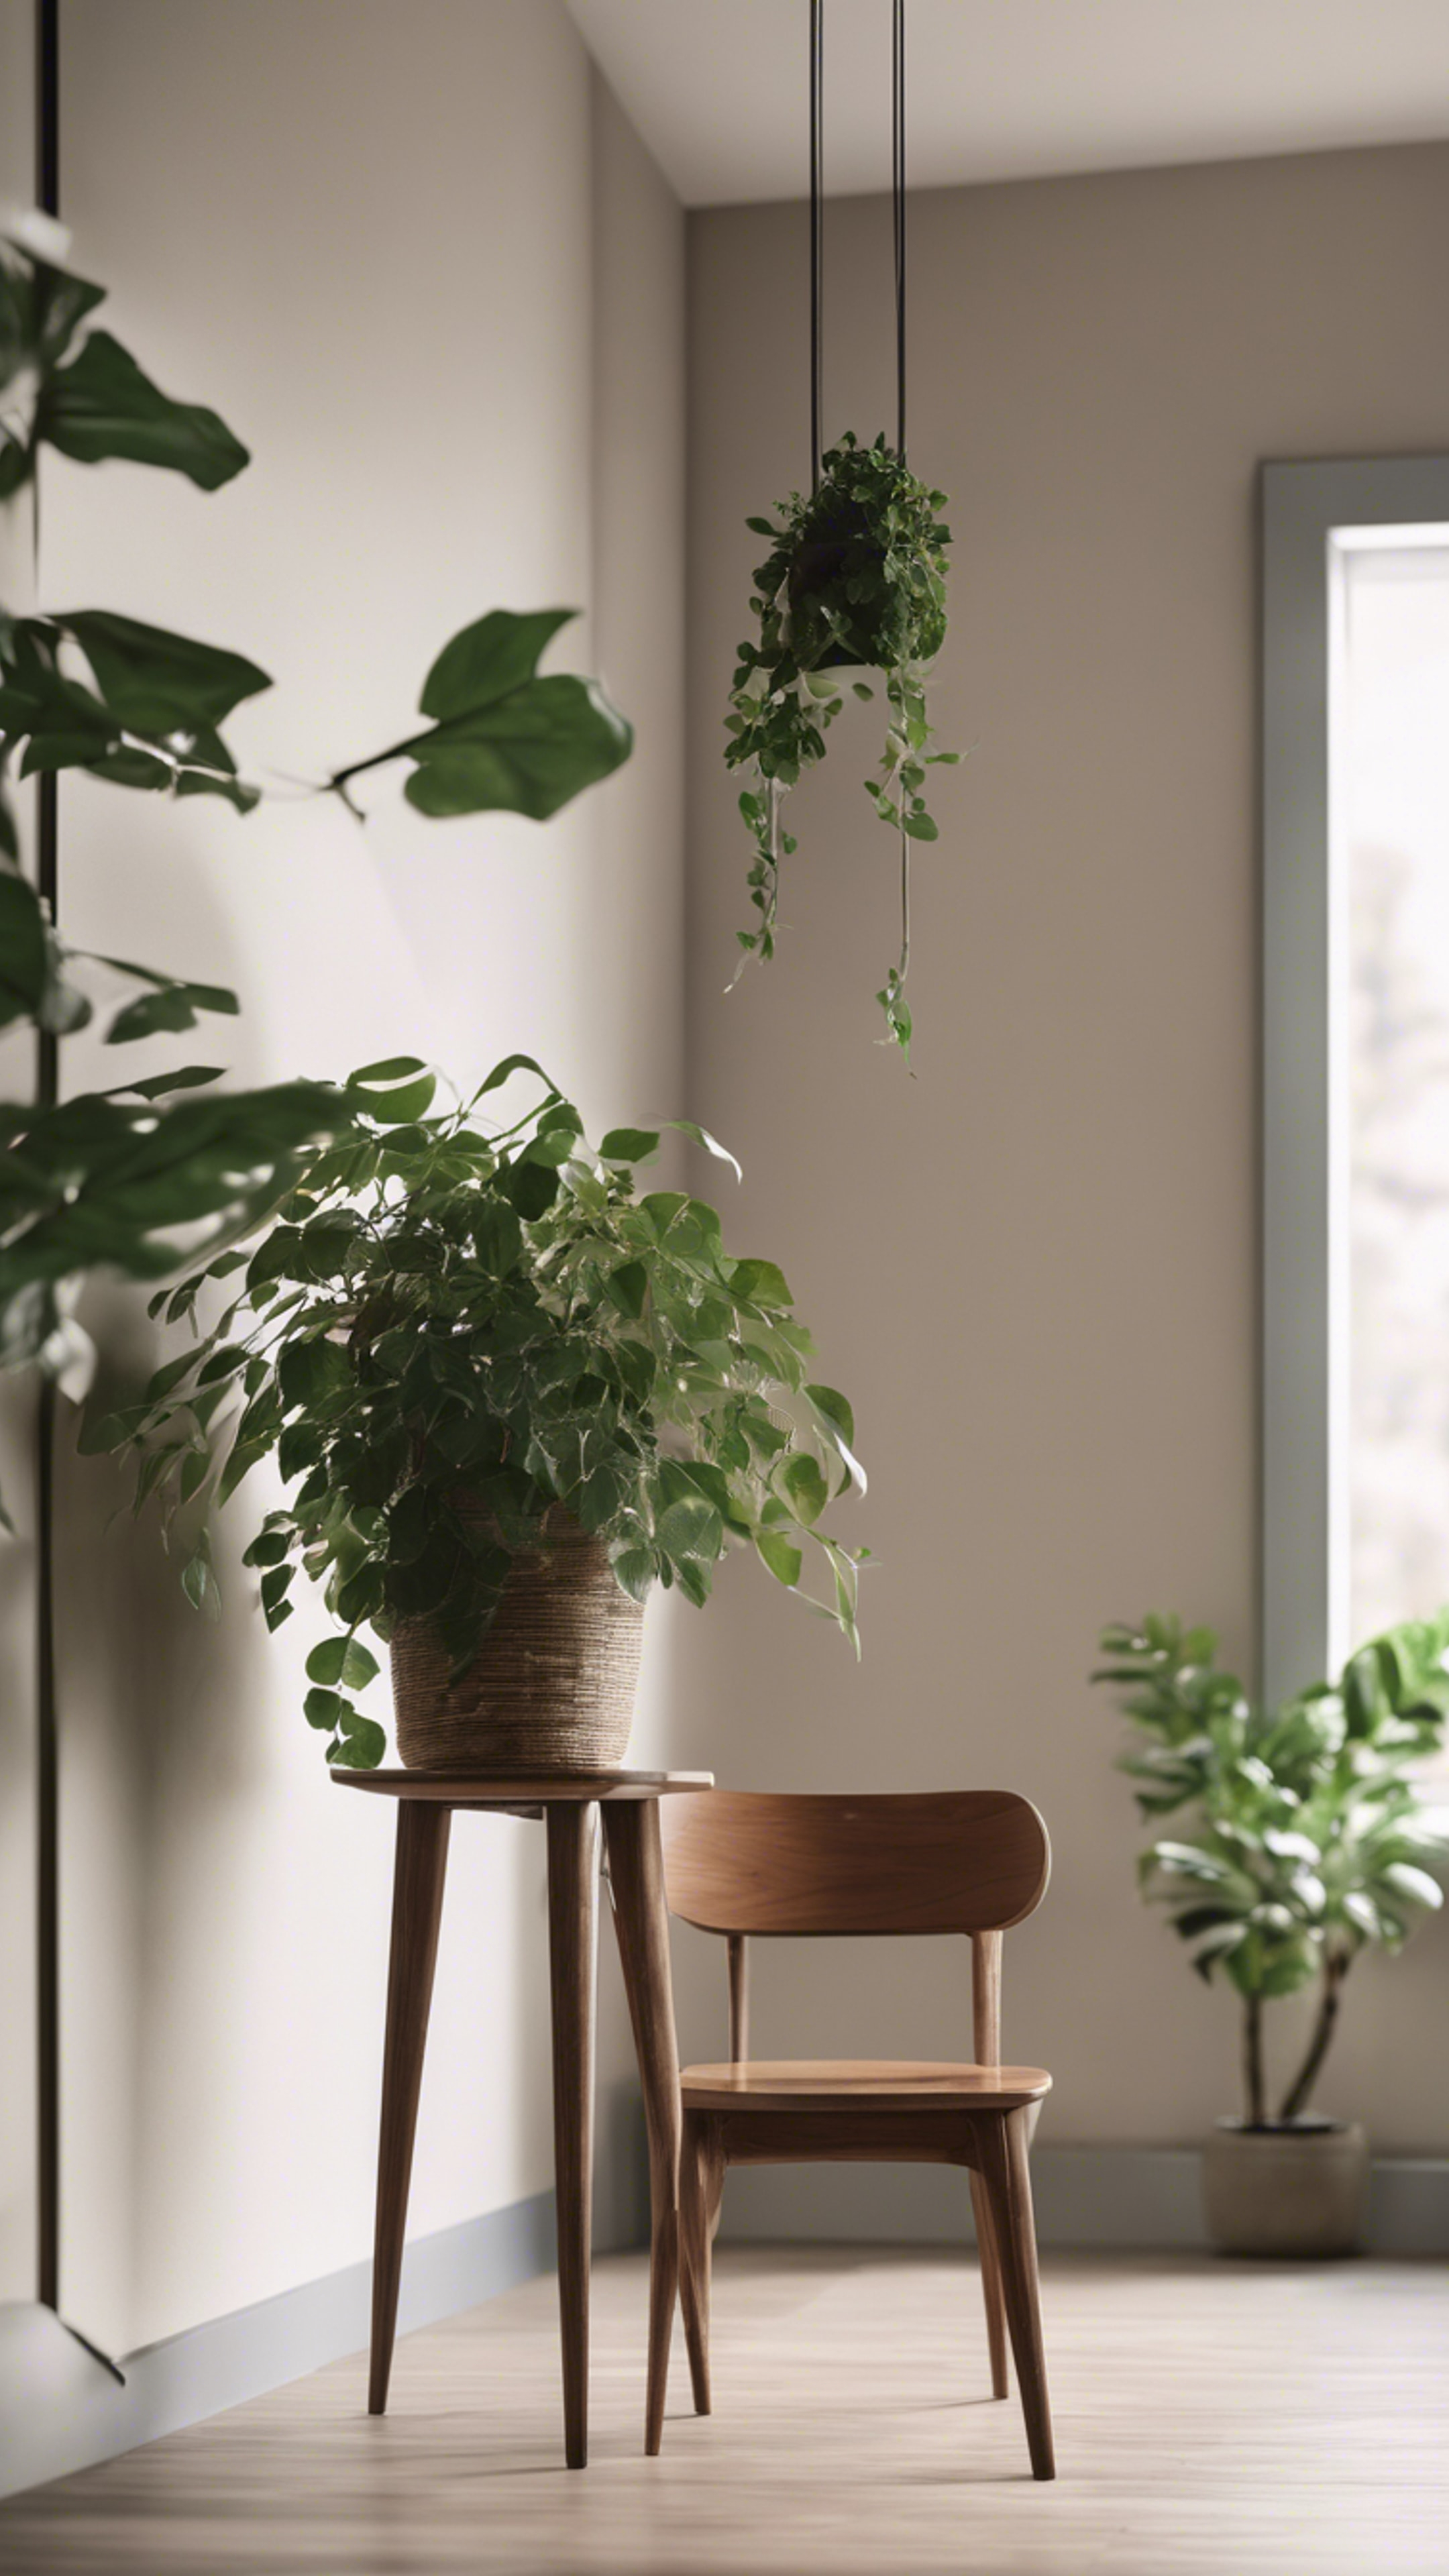 The corner of a minimalist room, featuring a hanging plant and a low, wooden side table. Шпалери[20a0de2ec9c541069b04]